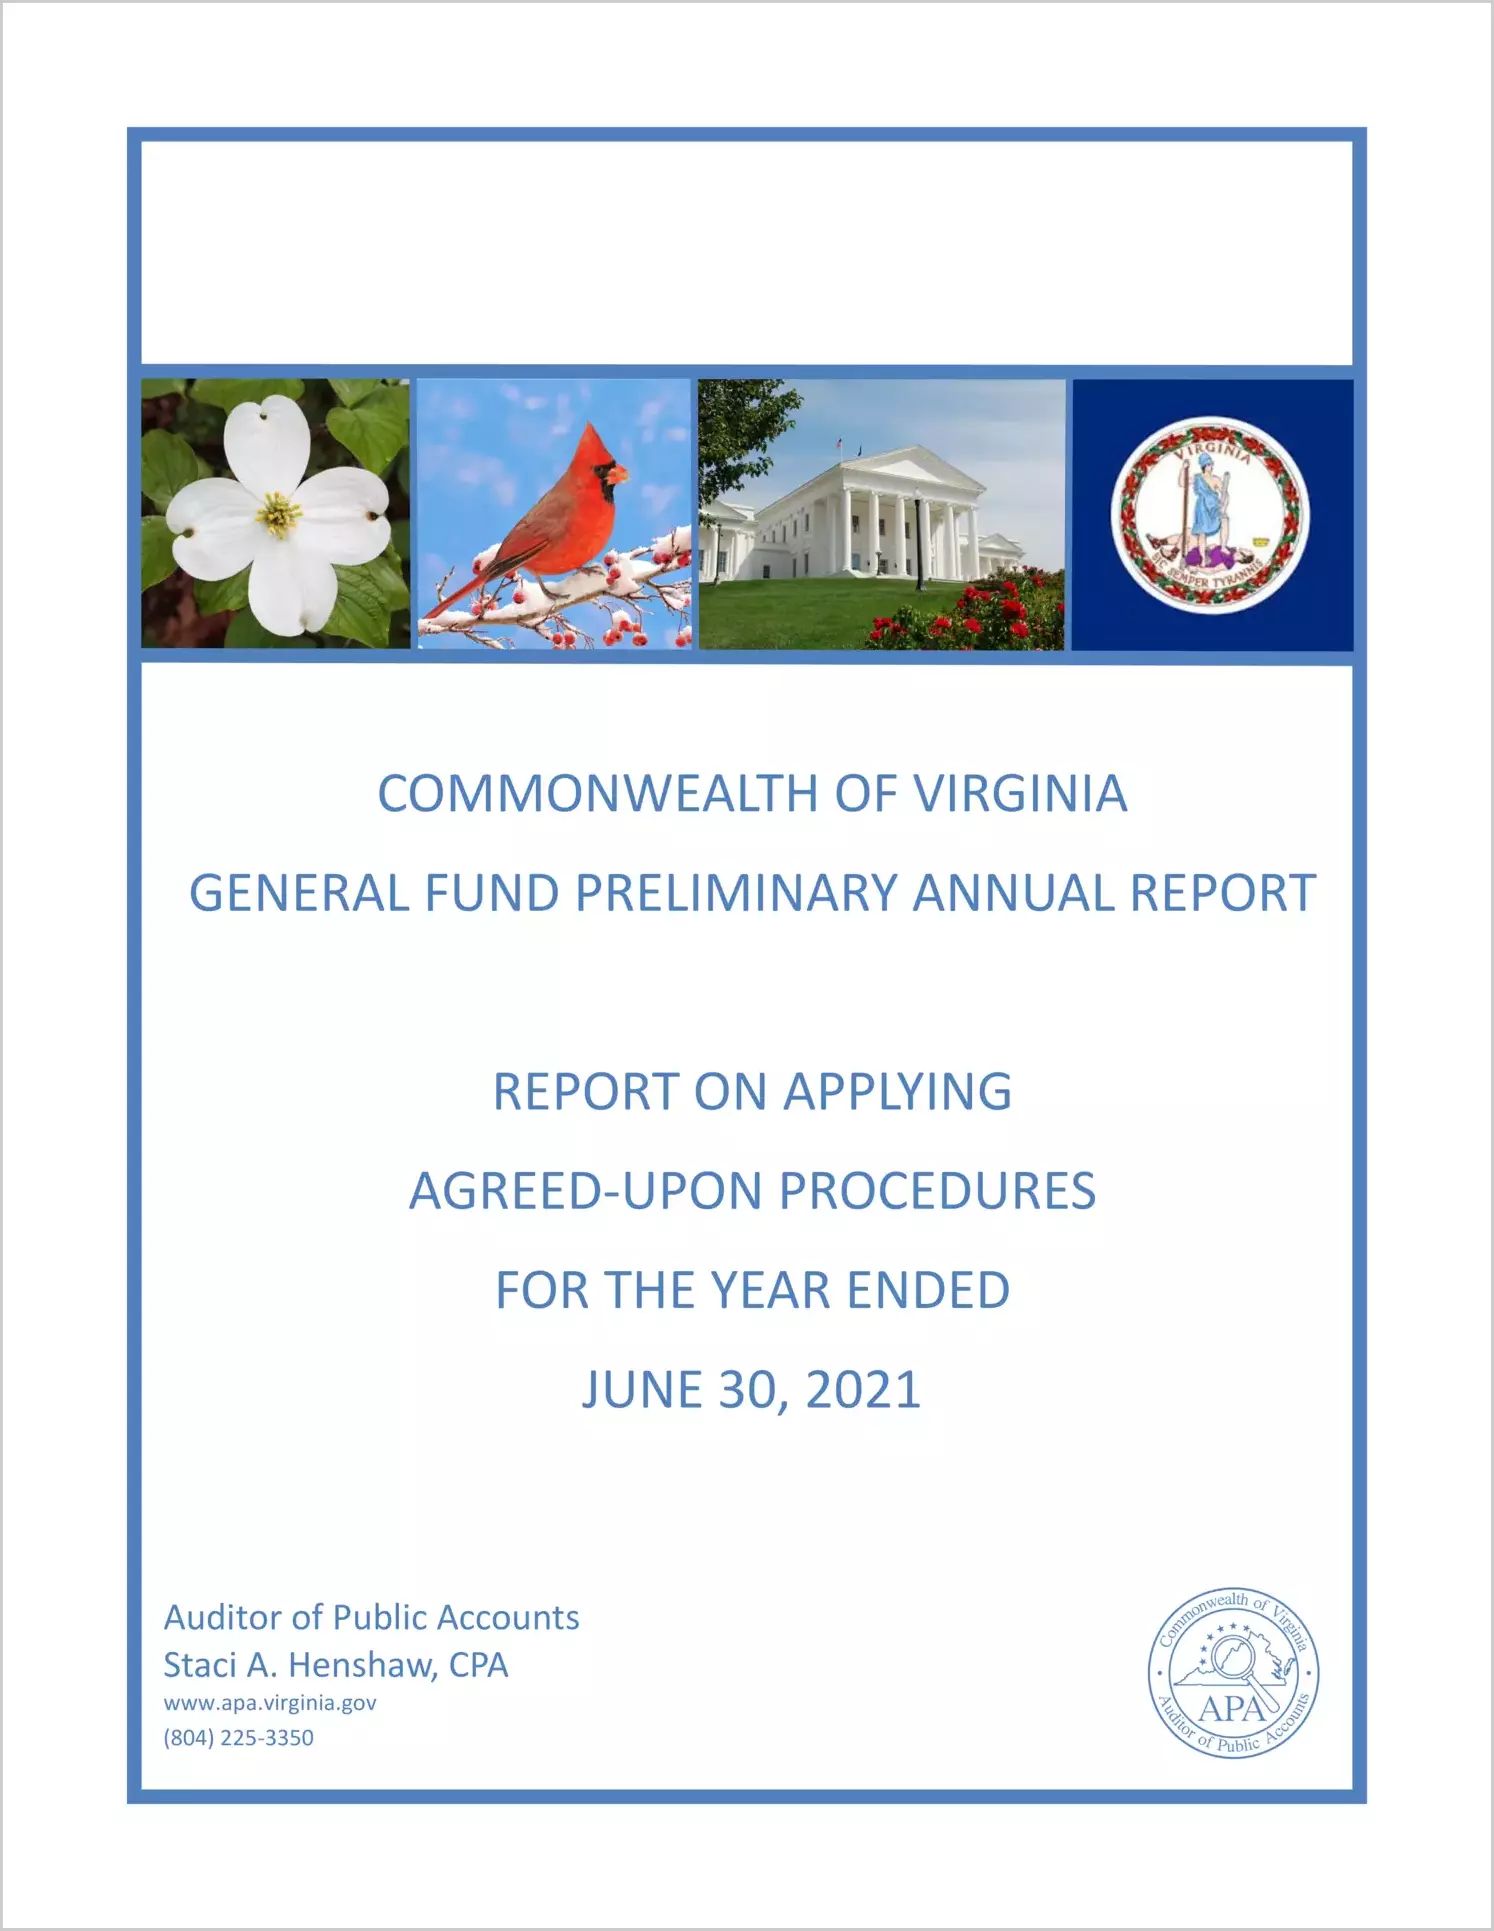 Commonwealth of Virginia General Fund Preliminary Annual Report for the year ended June 30, 2021